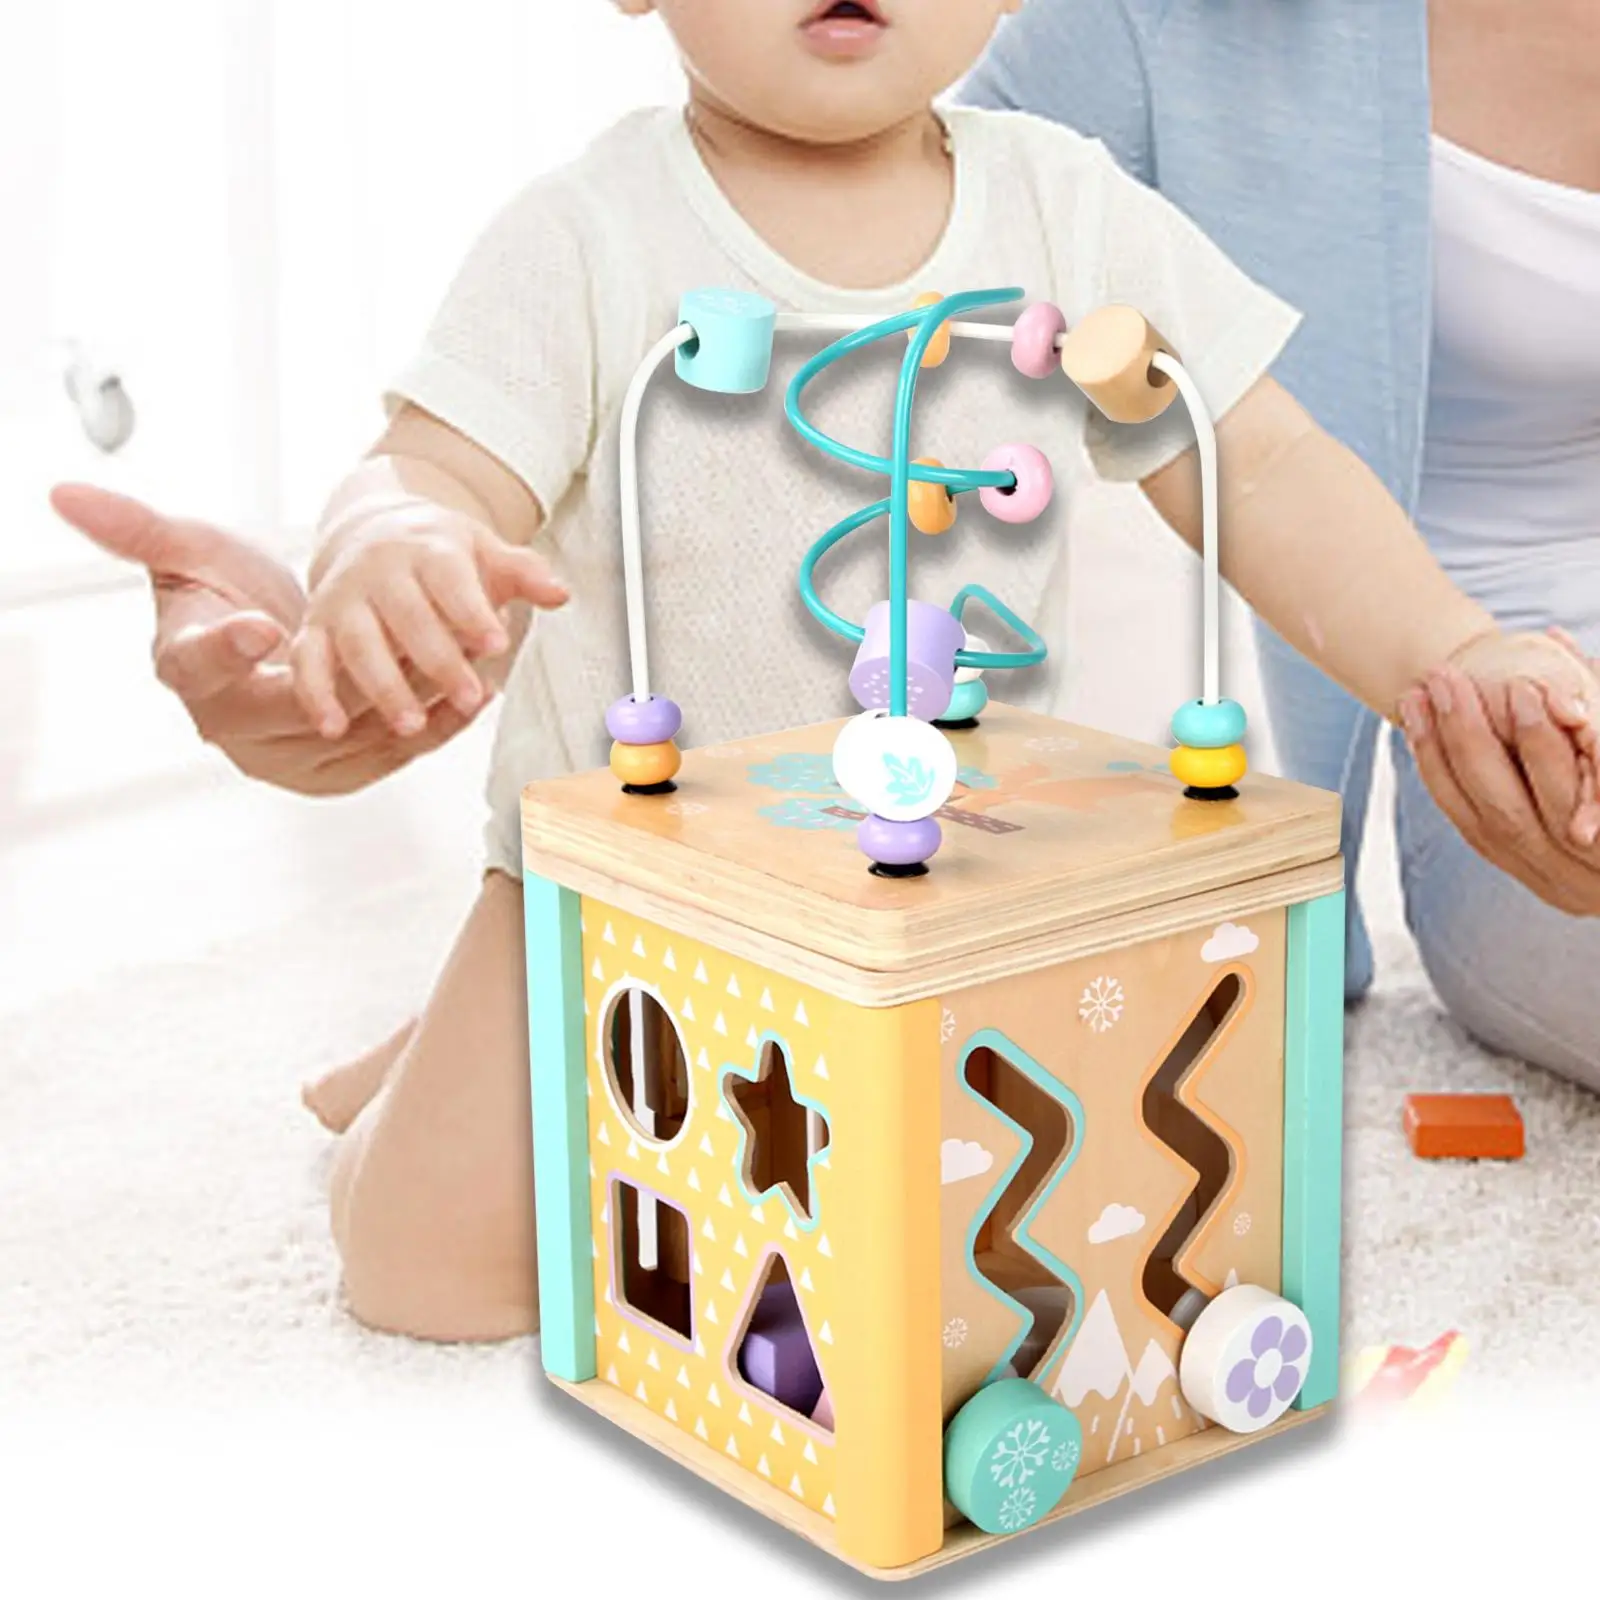 Activity Cube Toys Early Learning Colorful Montessori Game Wooden Educational Toy Developmental Toys Bead Maze Toy for Children